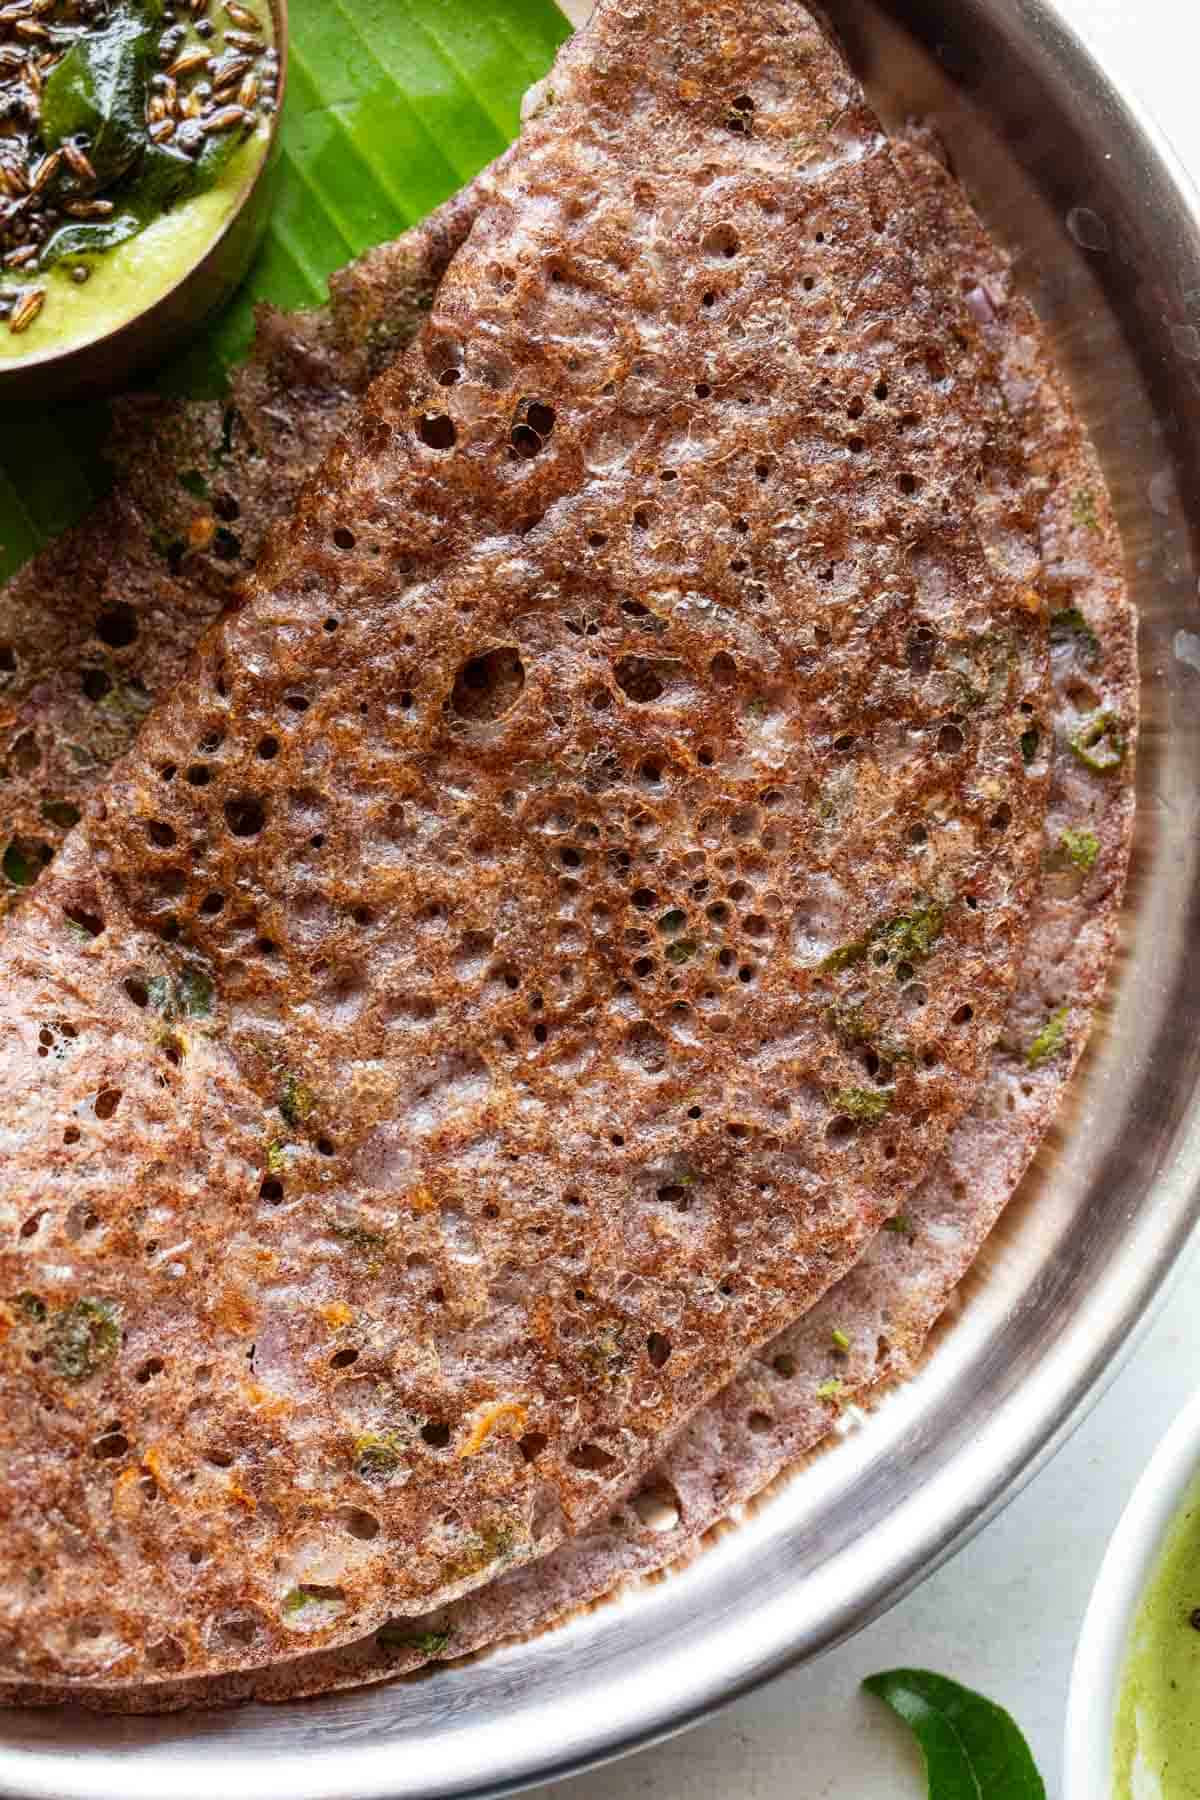 Close up of ragi dosa to show the lacy, crispy texture